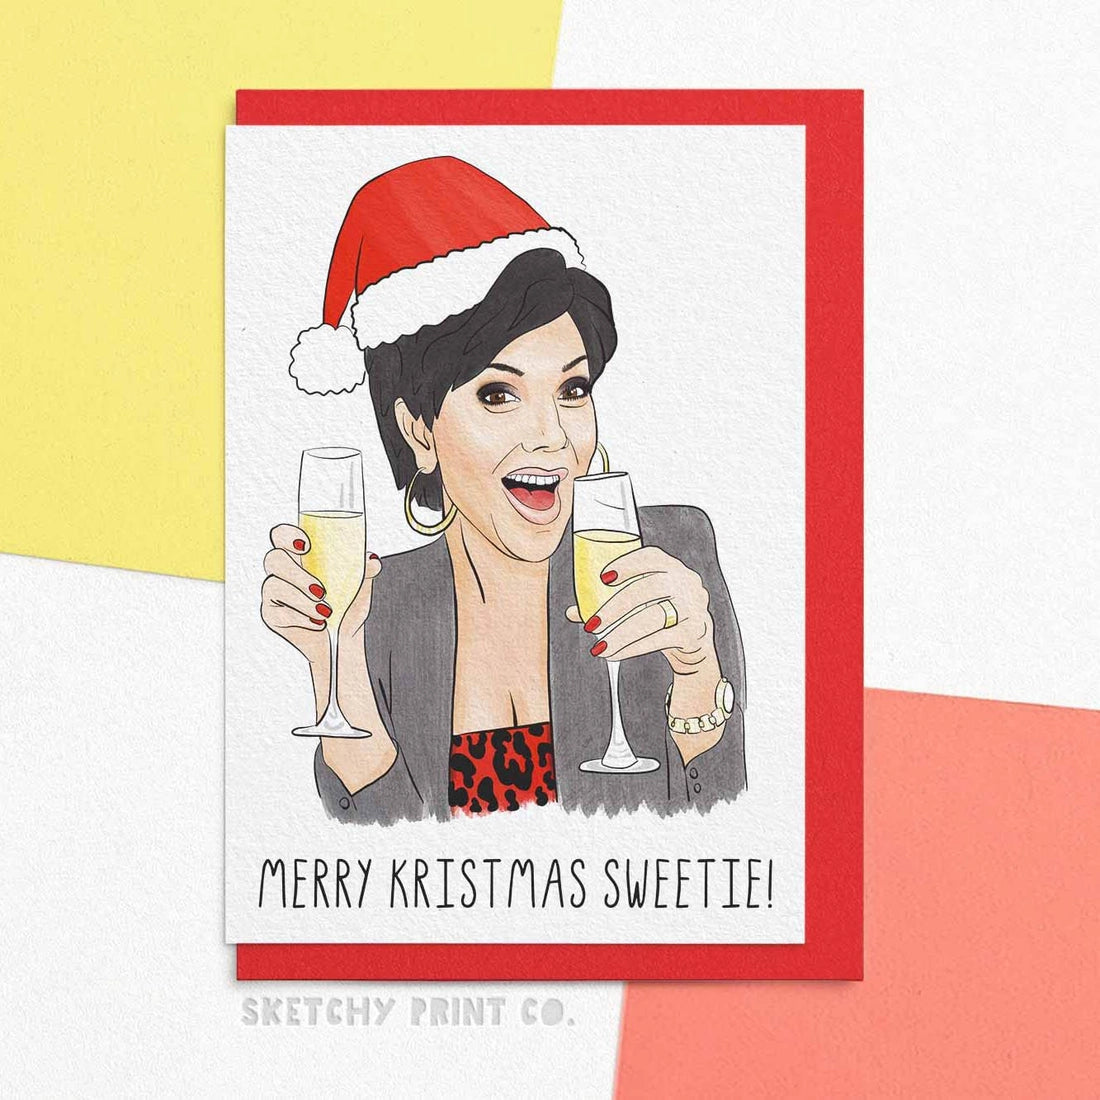 Merry Kristmas Sweetie by Sketchy Design Co